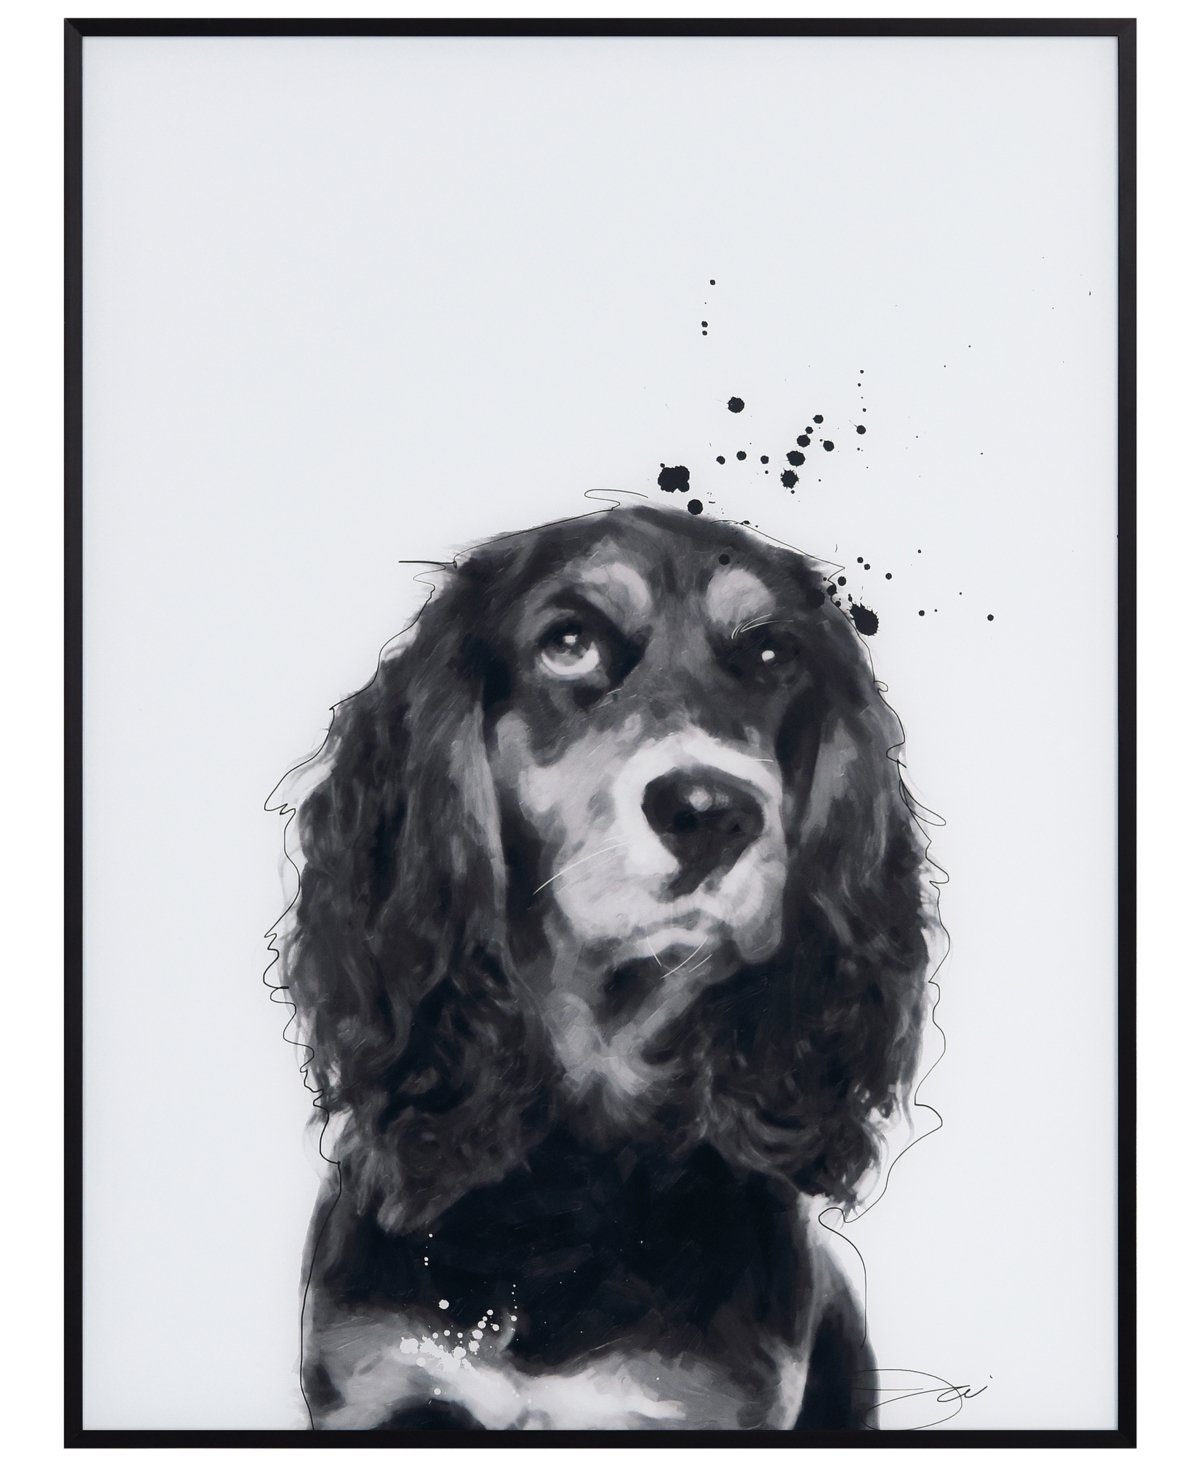 Empire Art Direct "cocker Spaniel" Pet Paintings On Printed Glass Encased With A Black Anodized Frame, 24" X 18" X 1" In Black And White